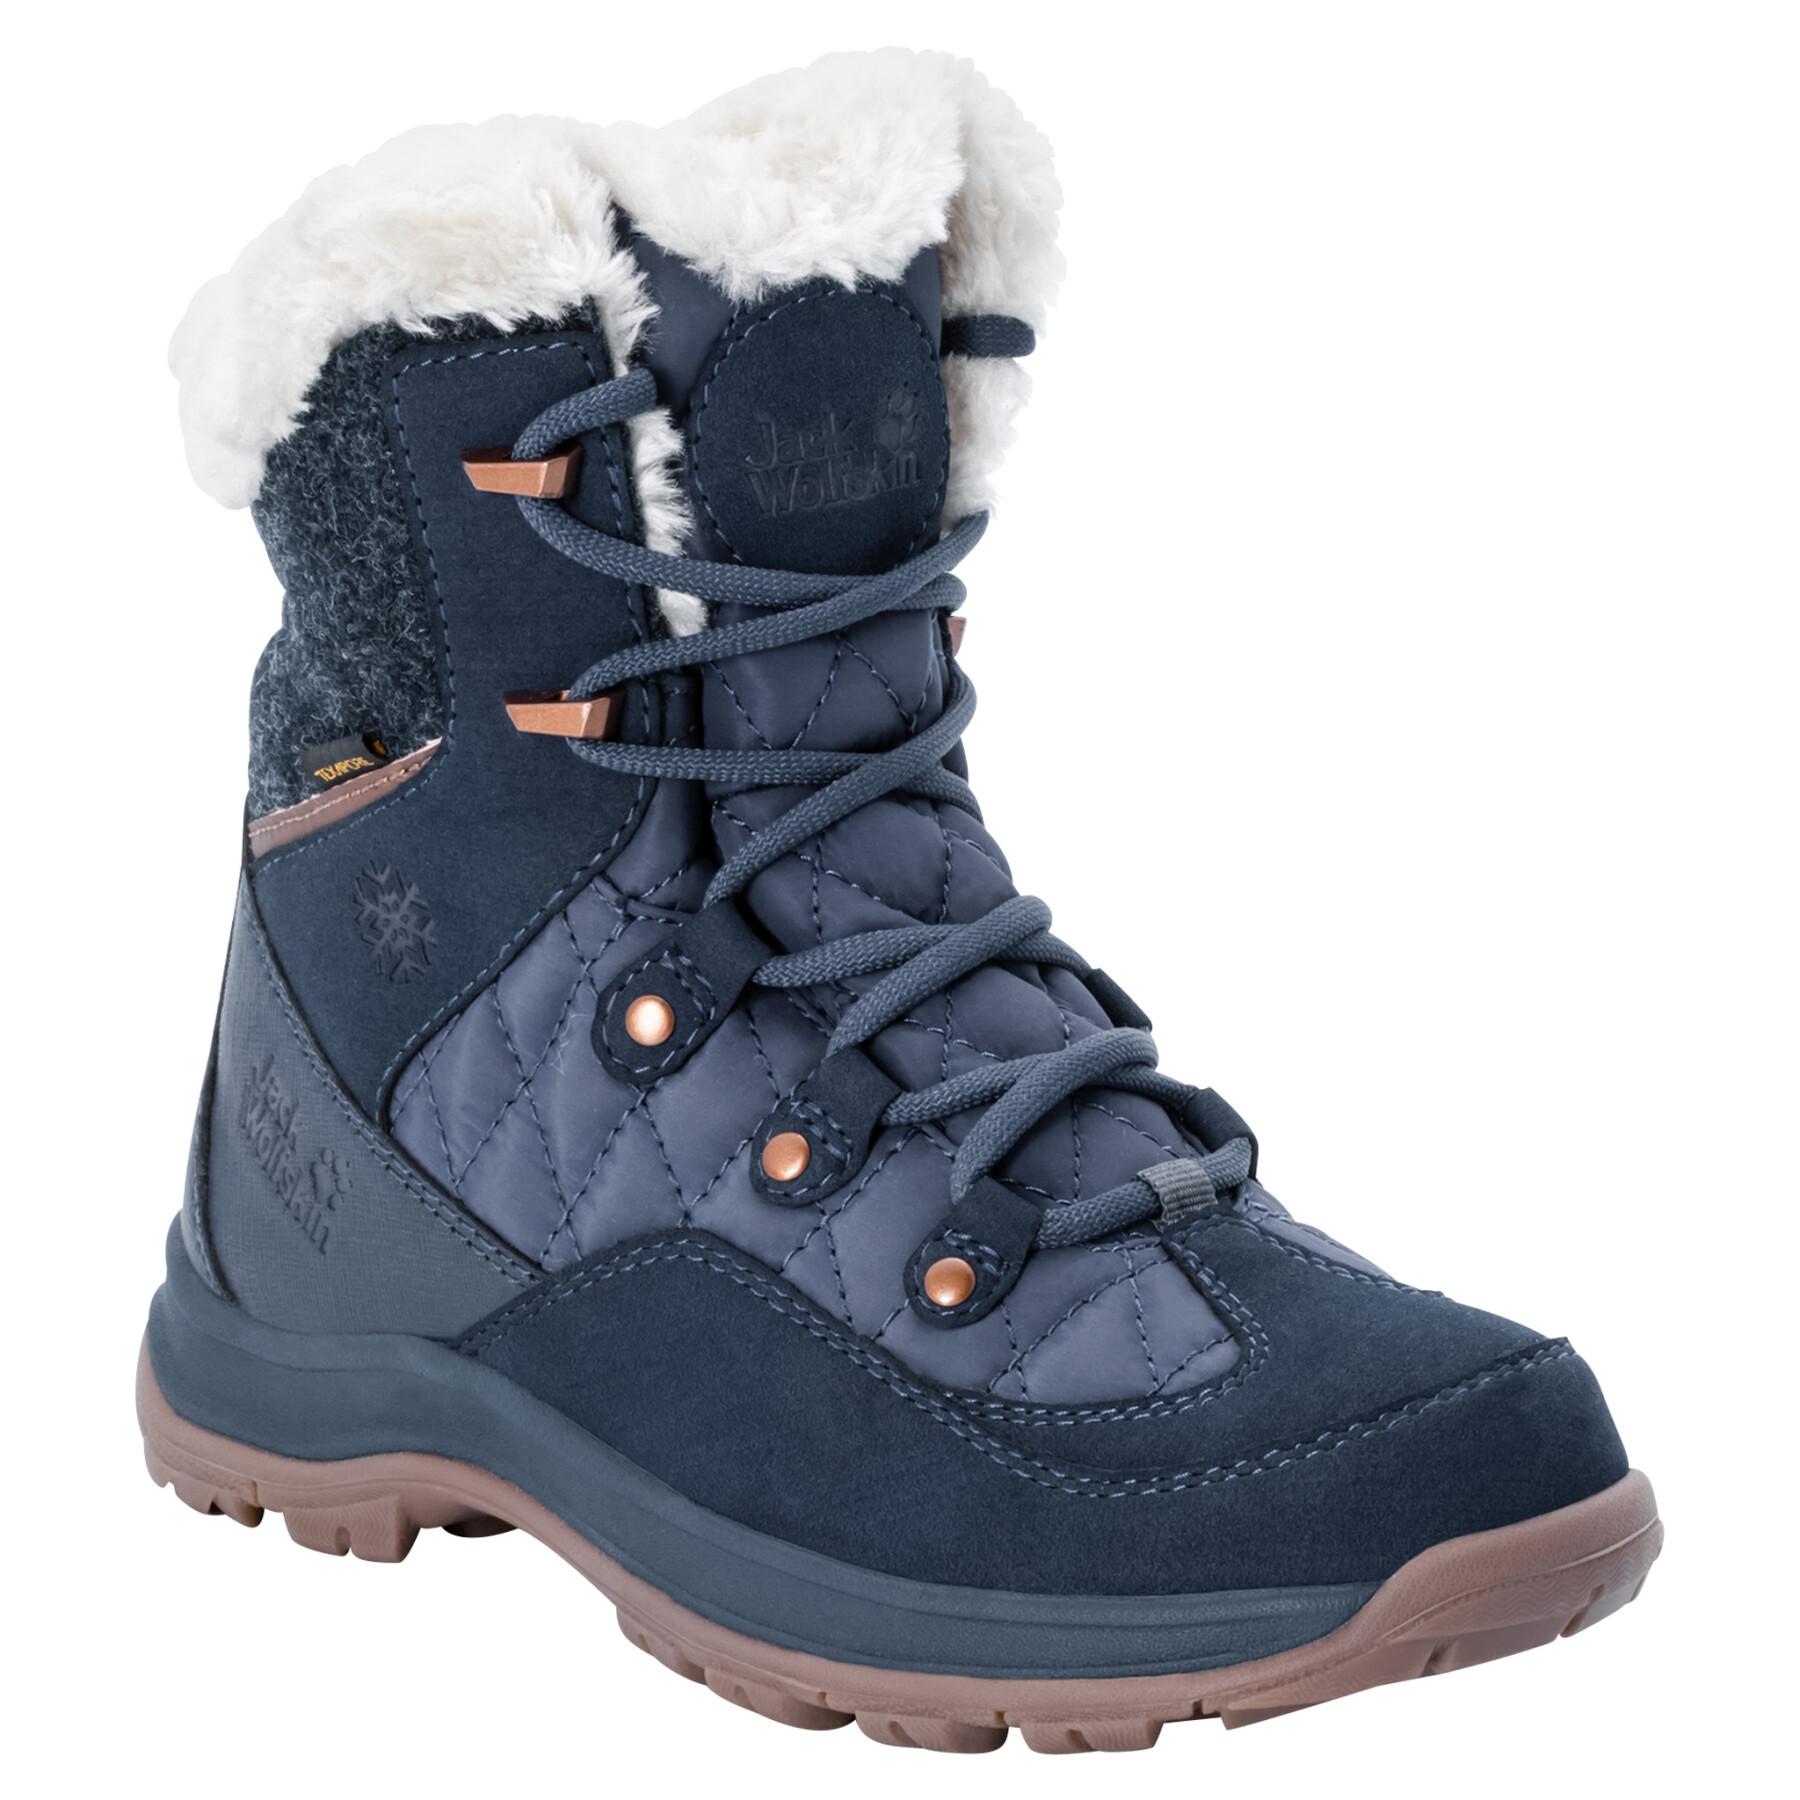 Buty damskie Jack Wolfskin cold bay texapore mid